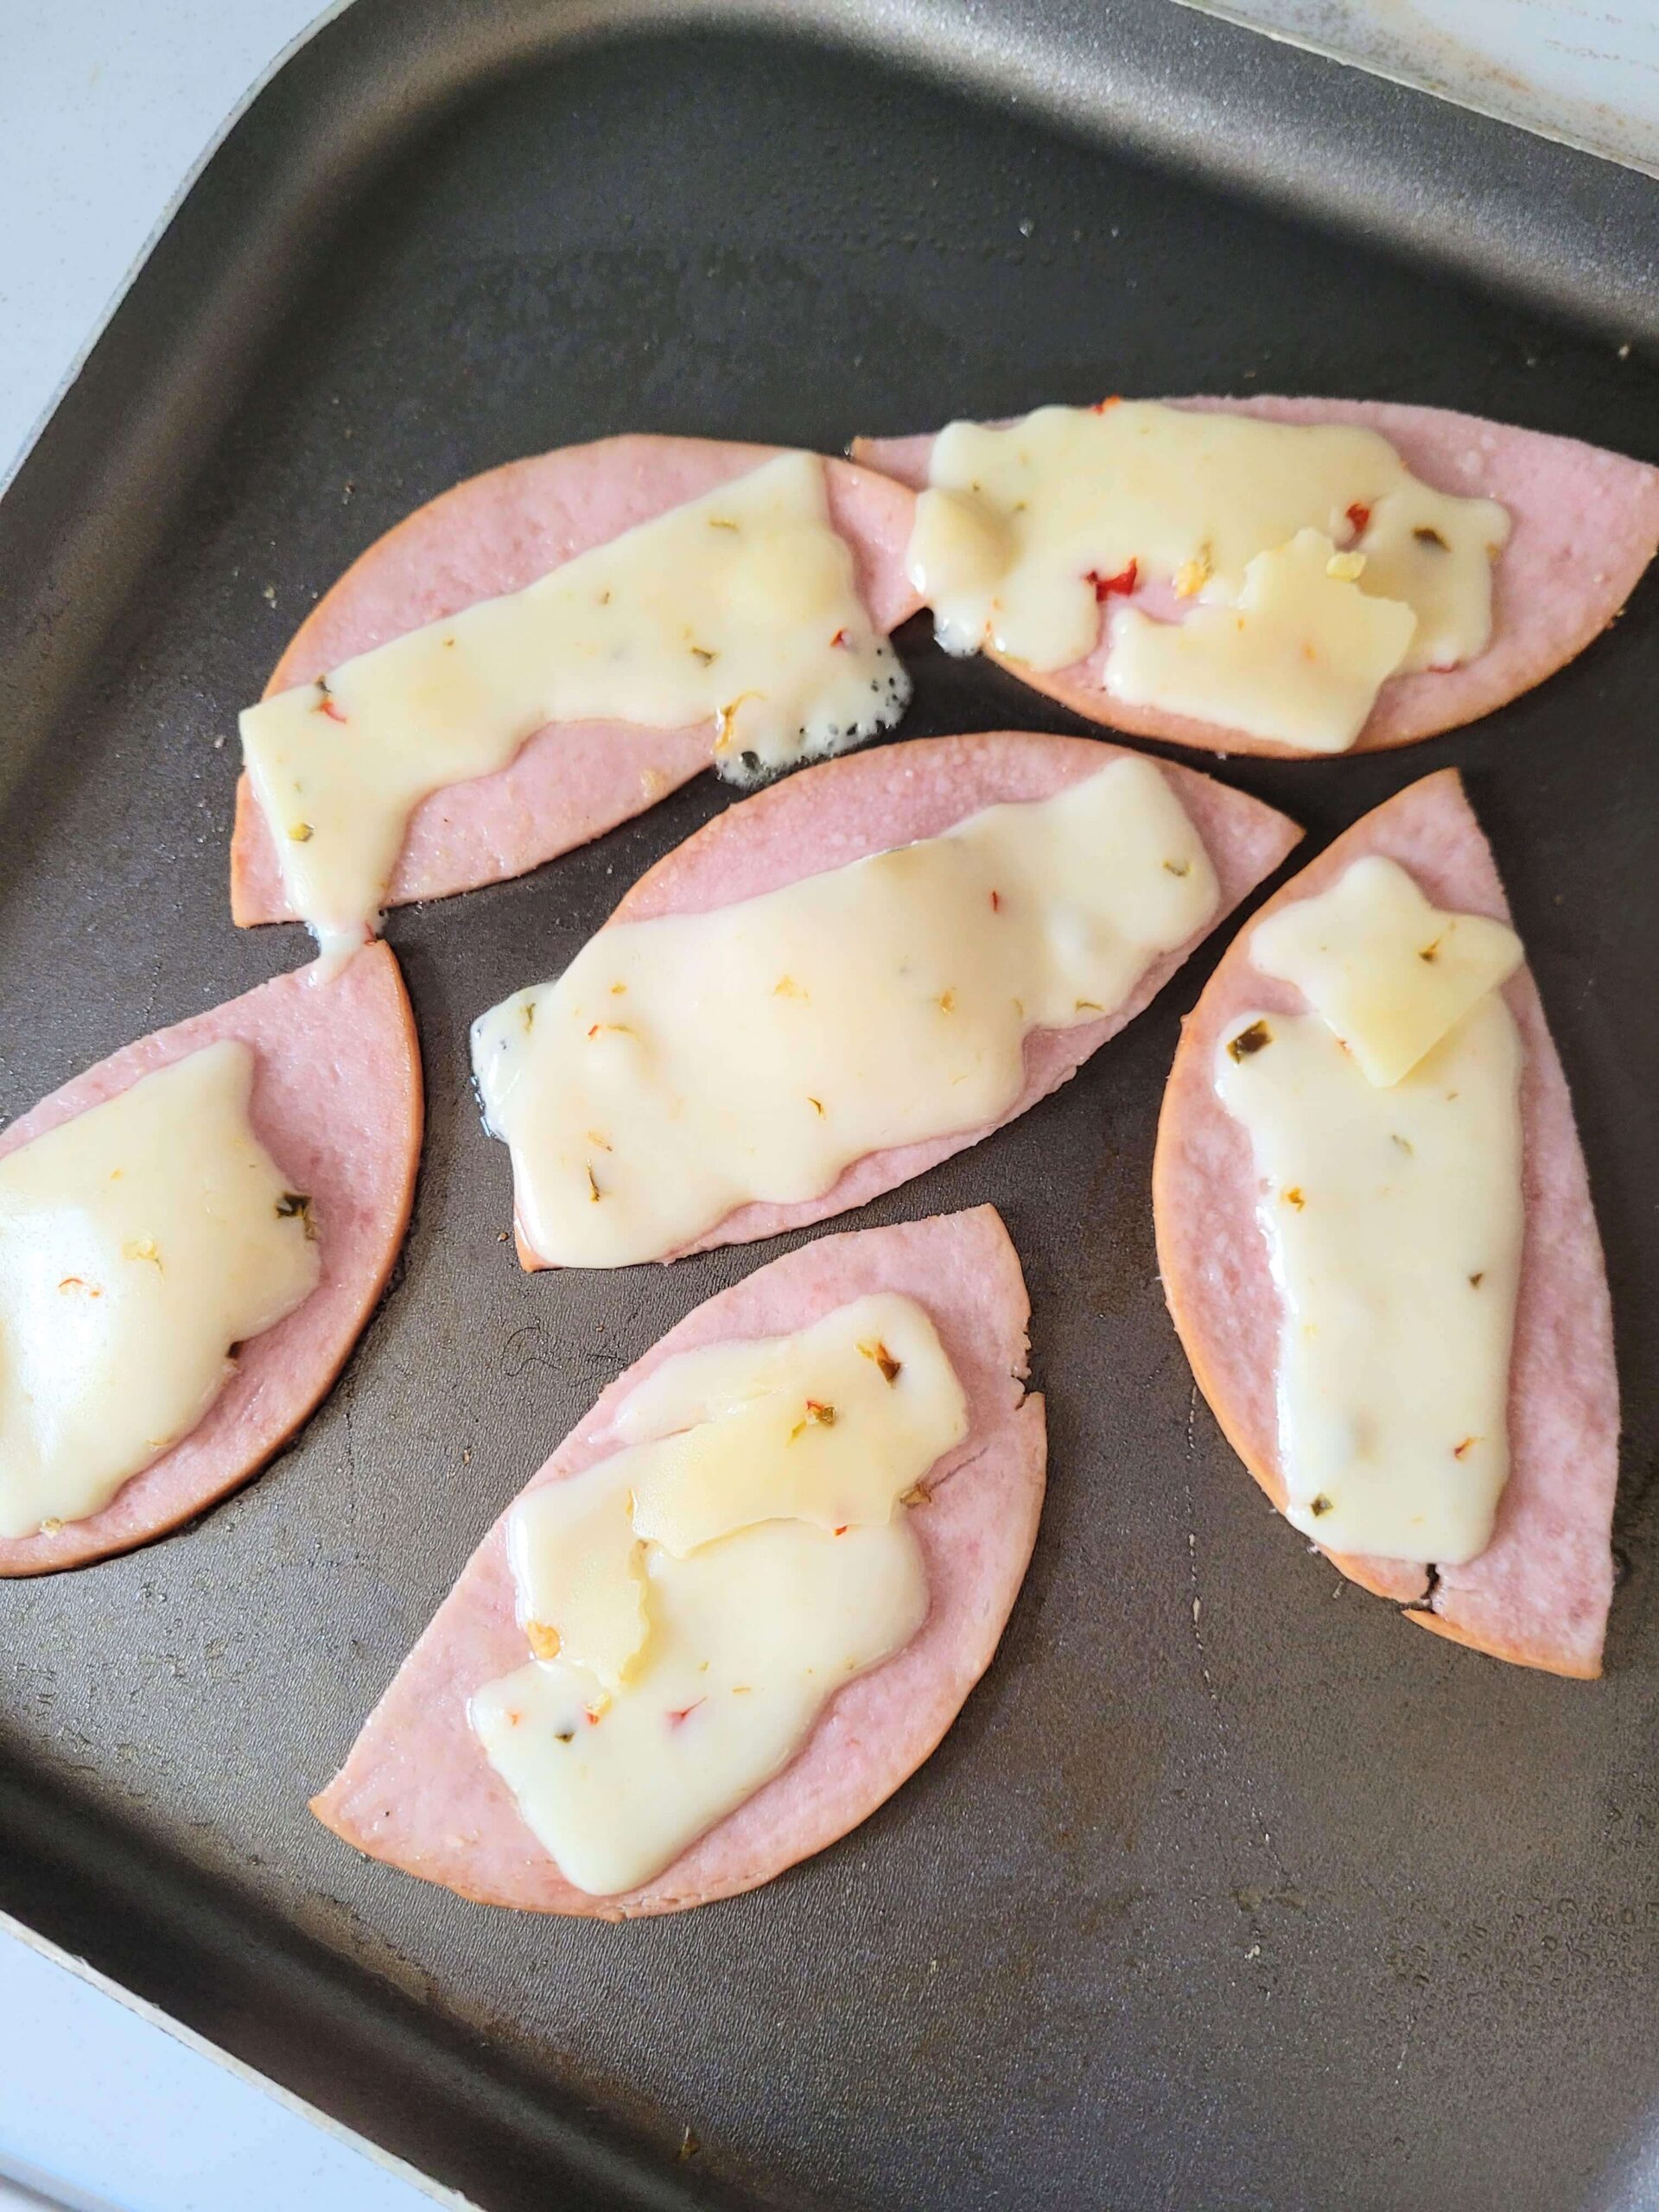 lunch meat cut into strips with cheese melted on top in a black frying pan